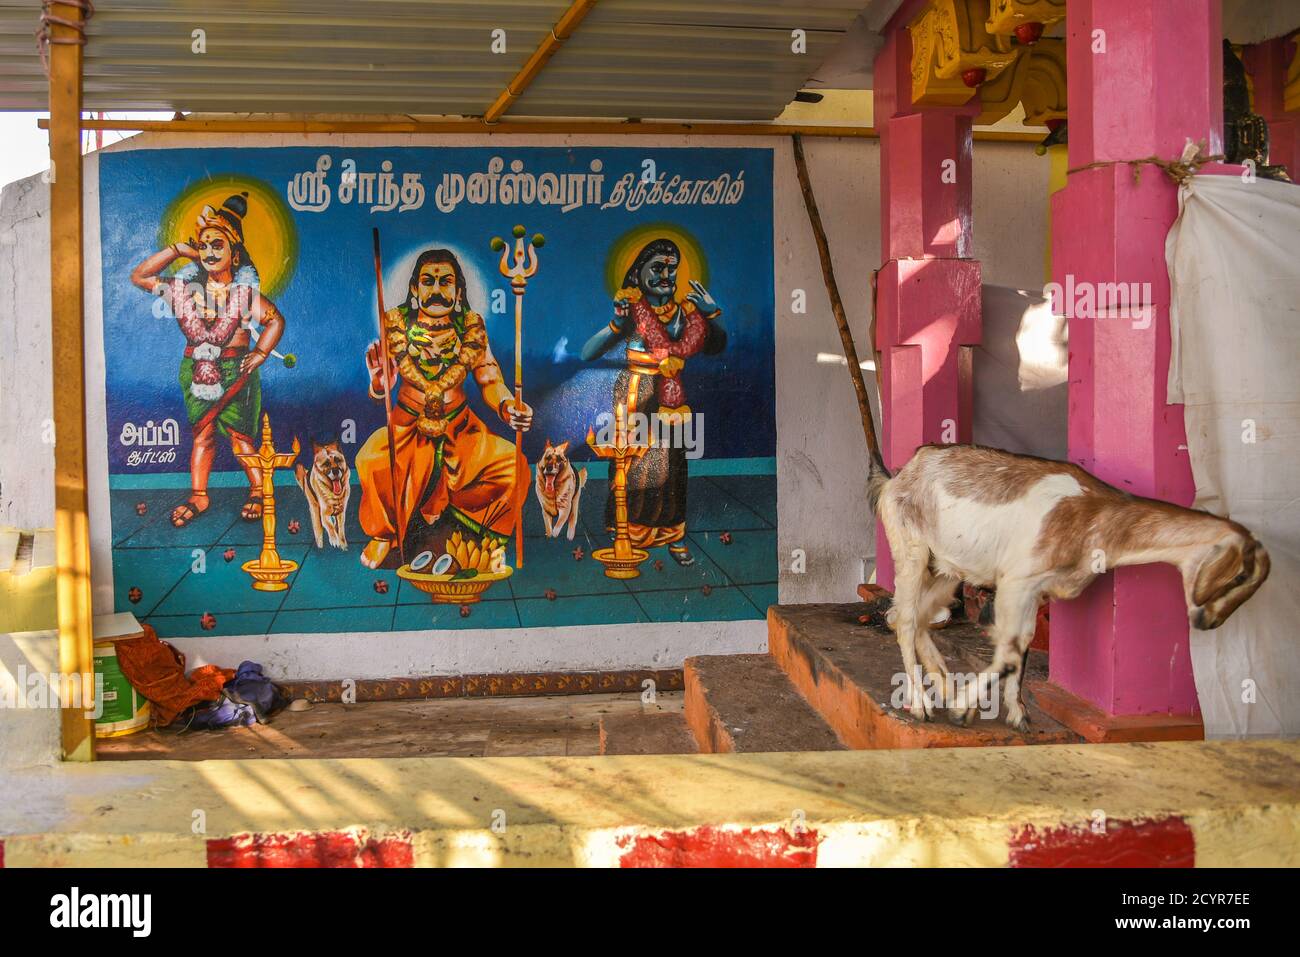 TAMILNADU, INDIA a Hindu Indian temple in Coimbatore. with colorful painting of hindu gods on wall. rural village worship place Stock Photo